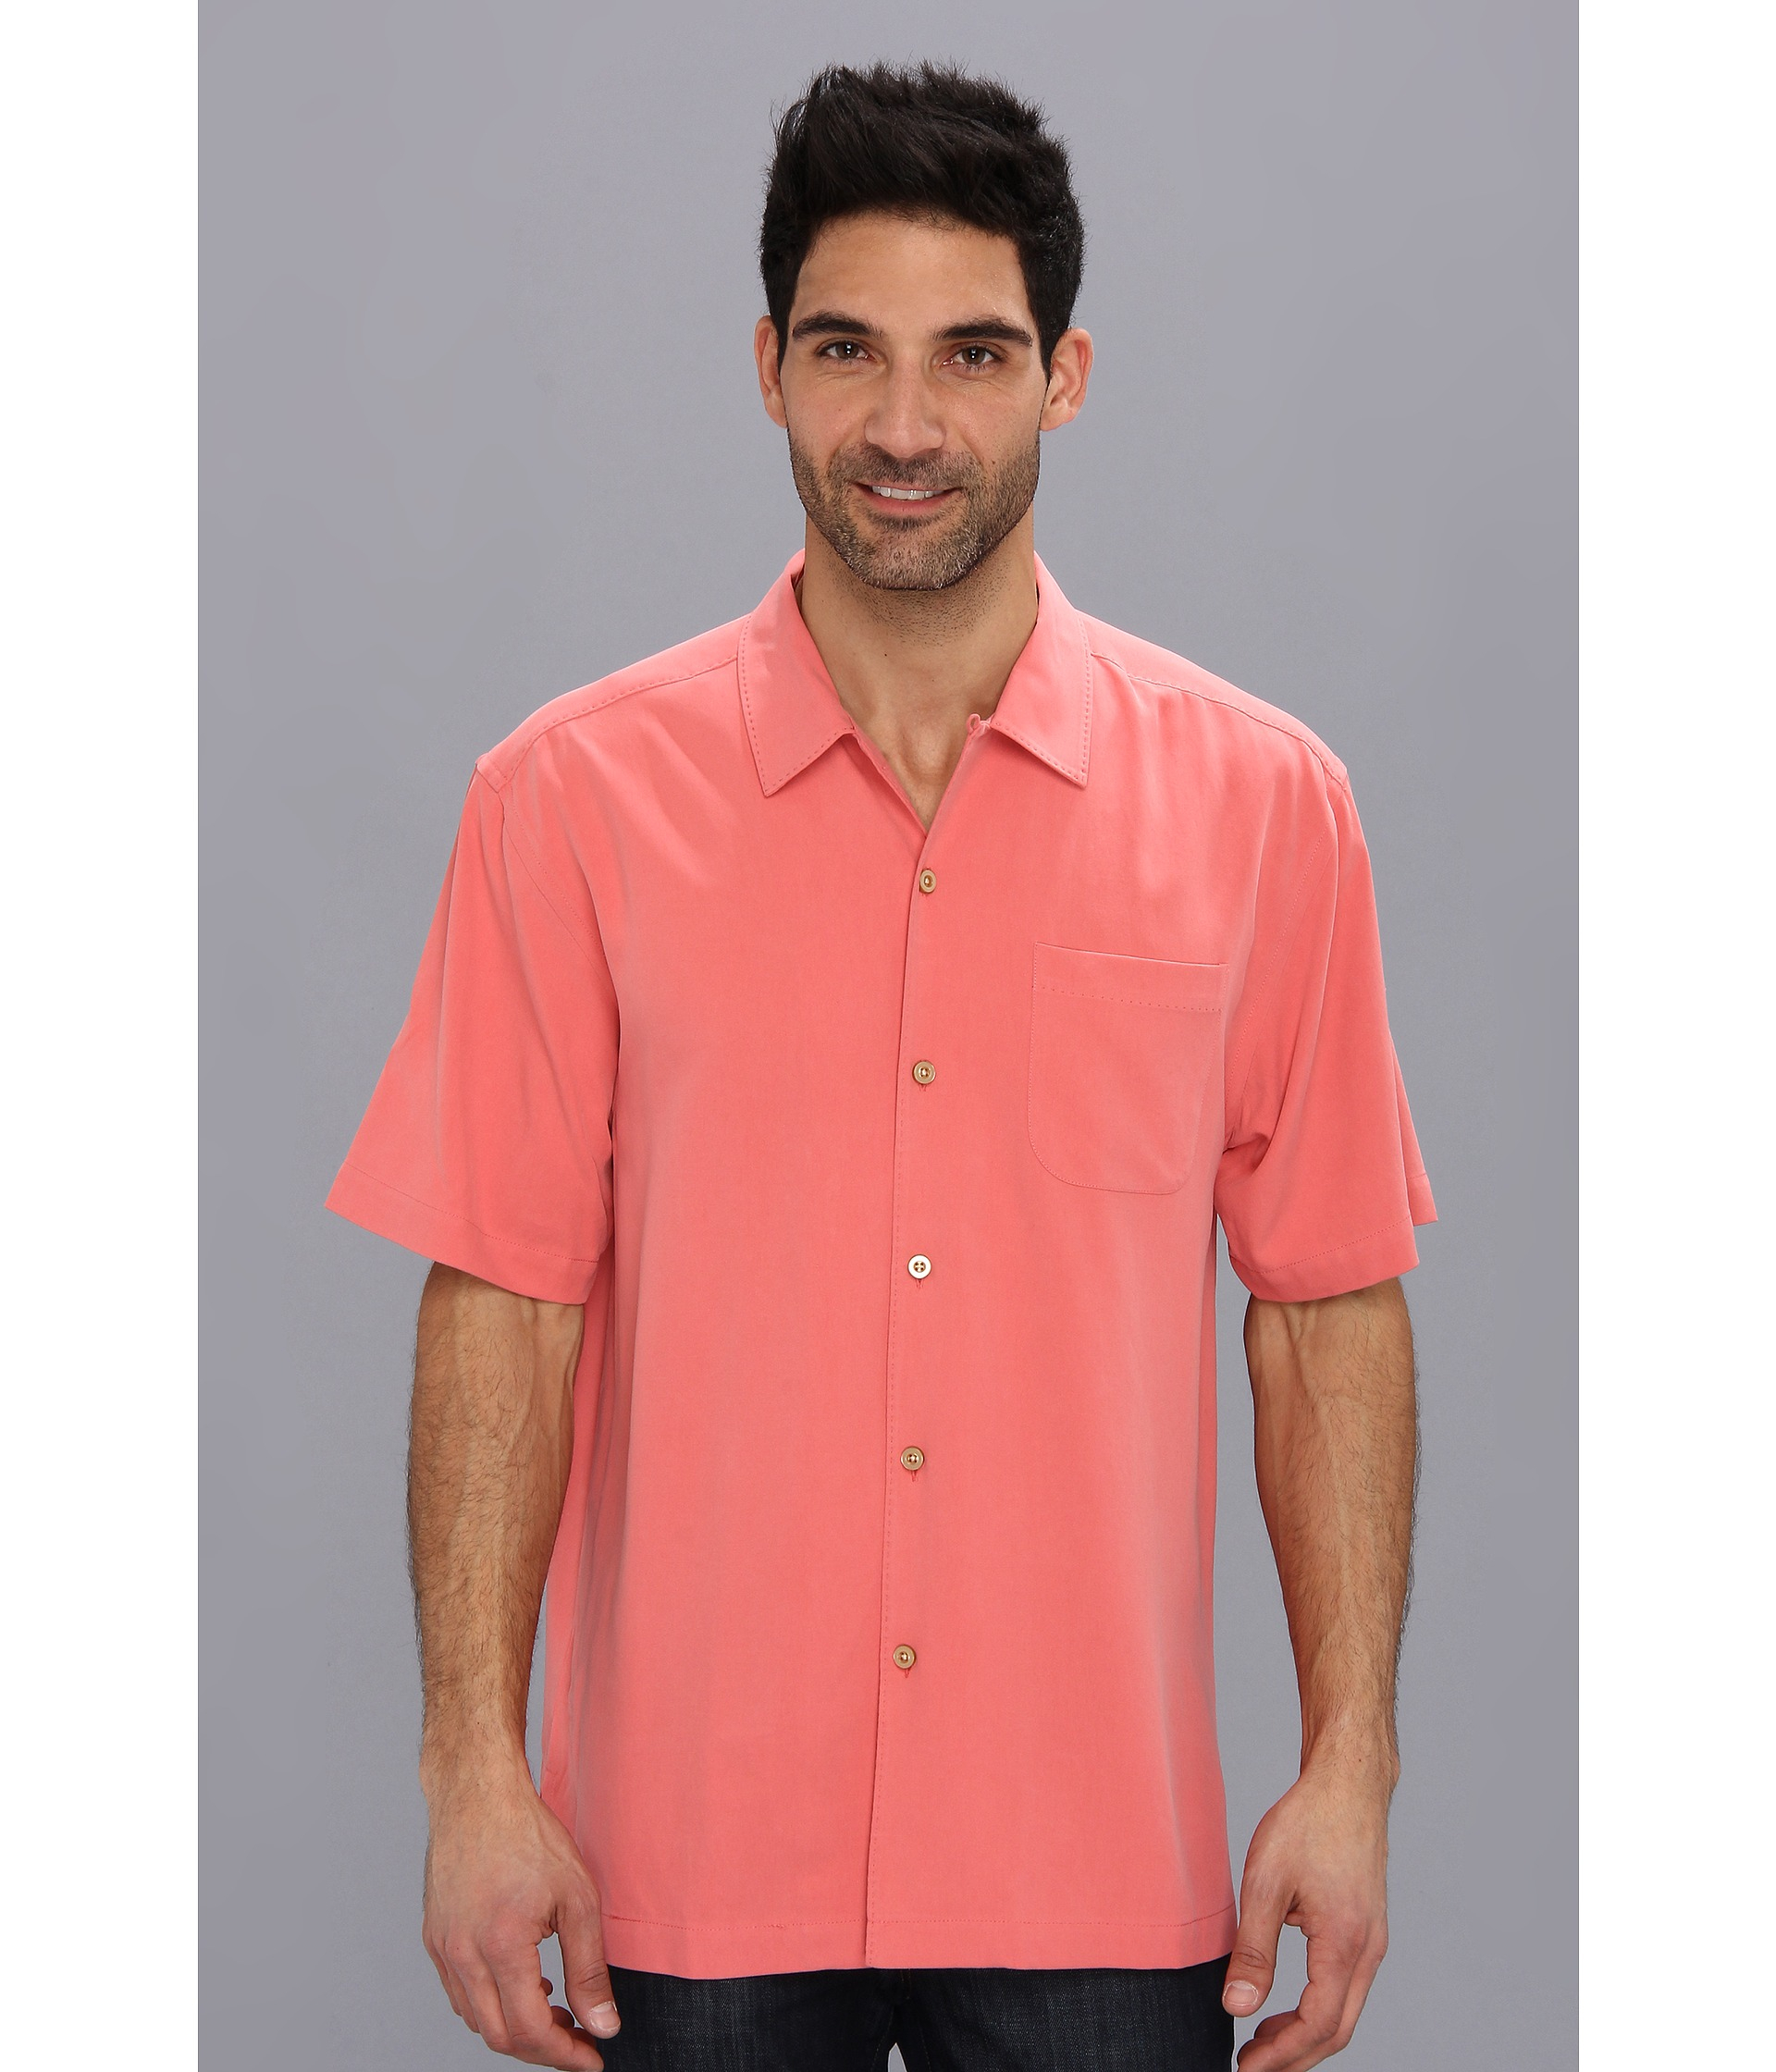 tommy bahama clothes on sale